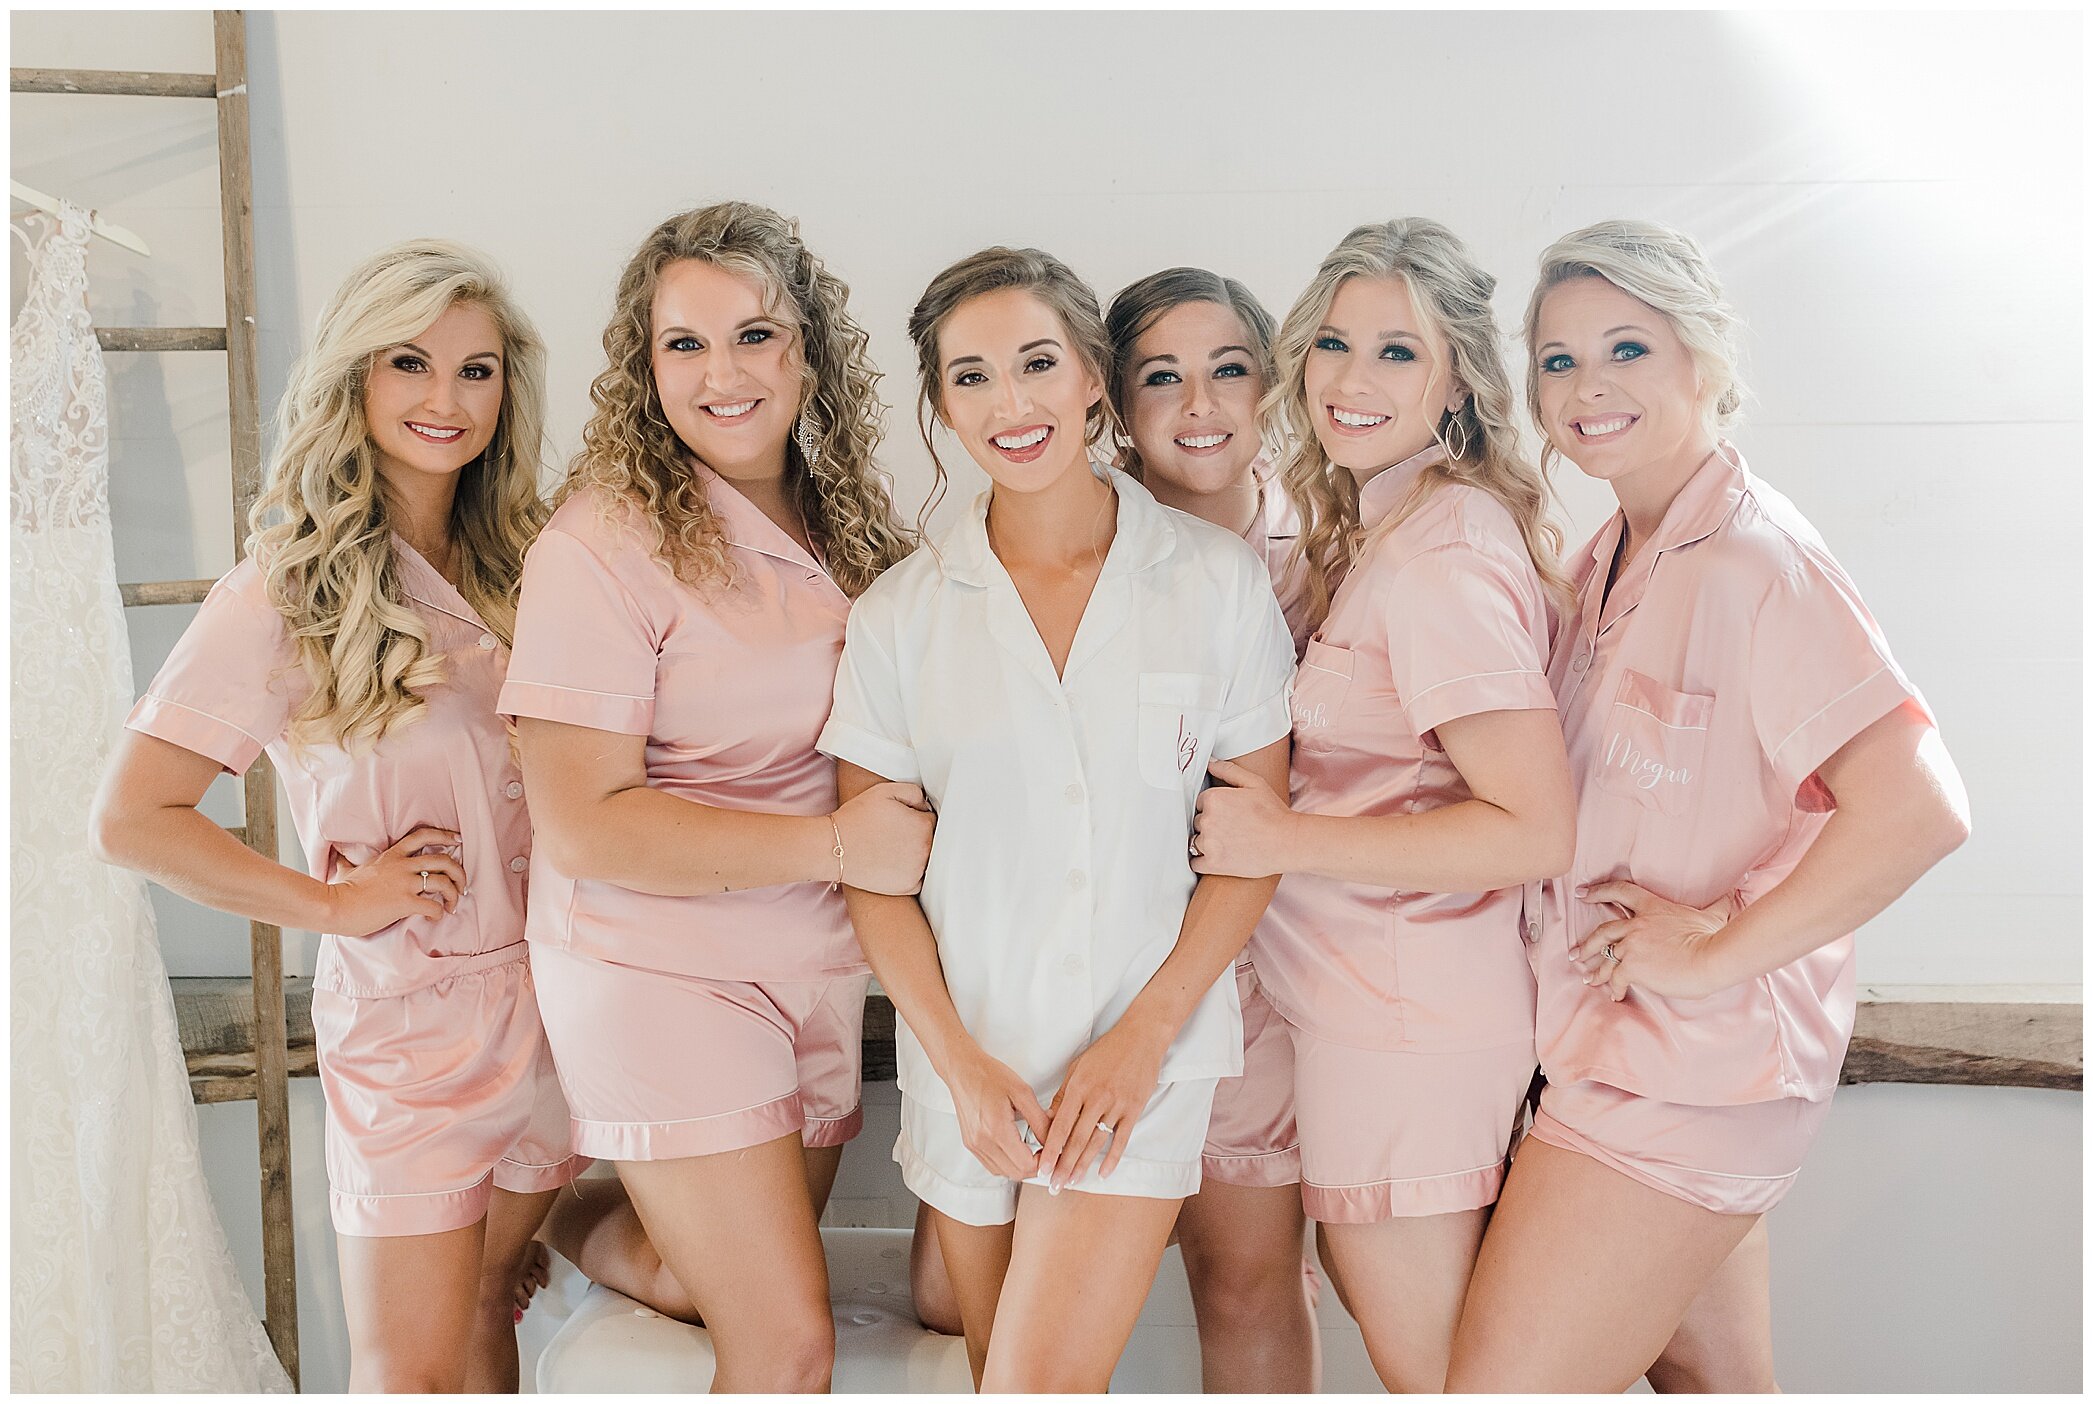 bride poses with bridesmaids in matching pink pjs